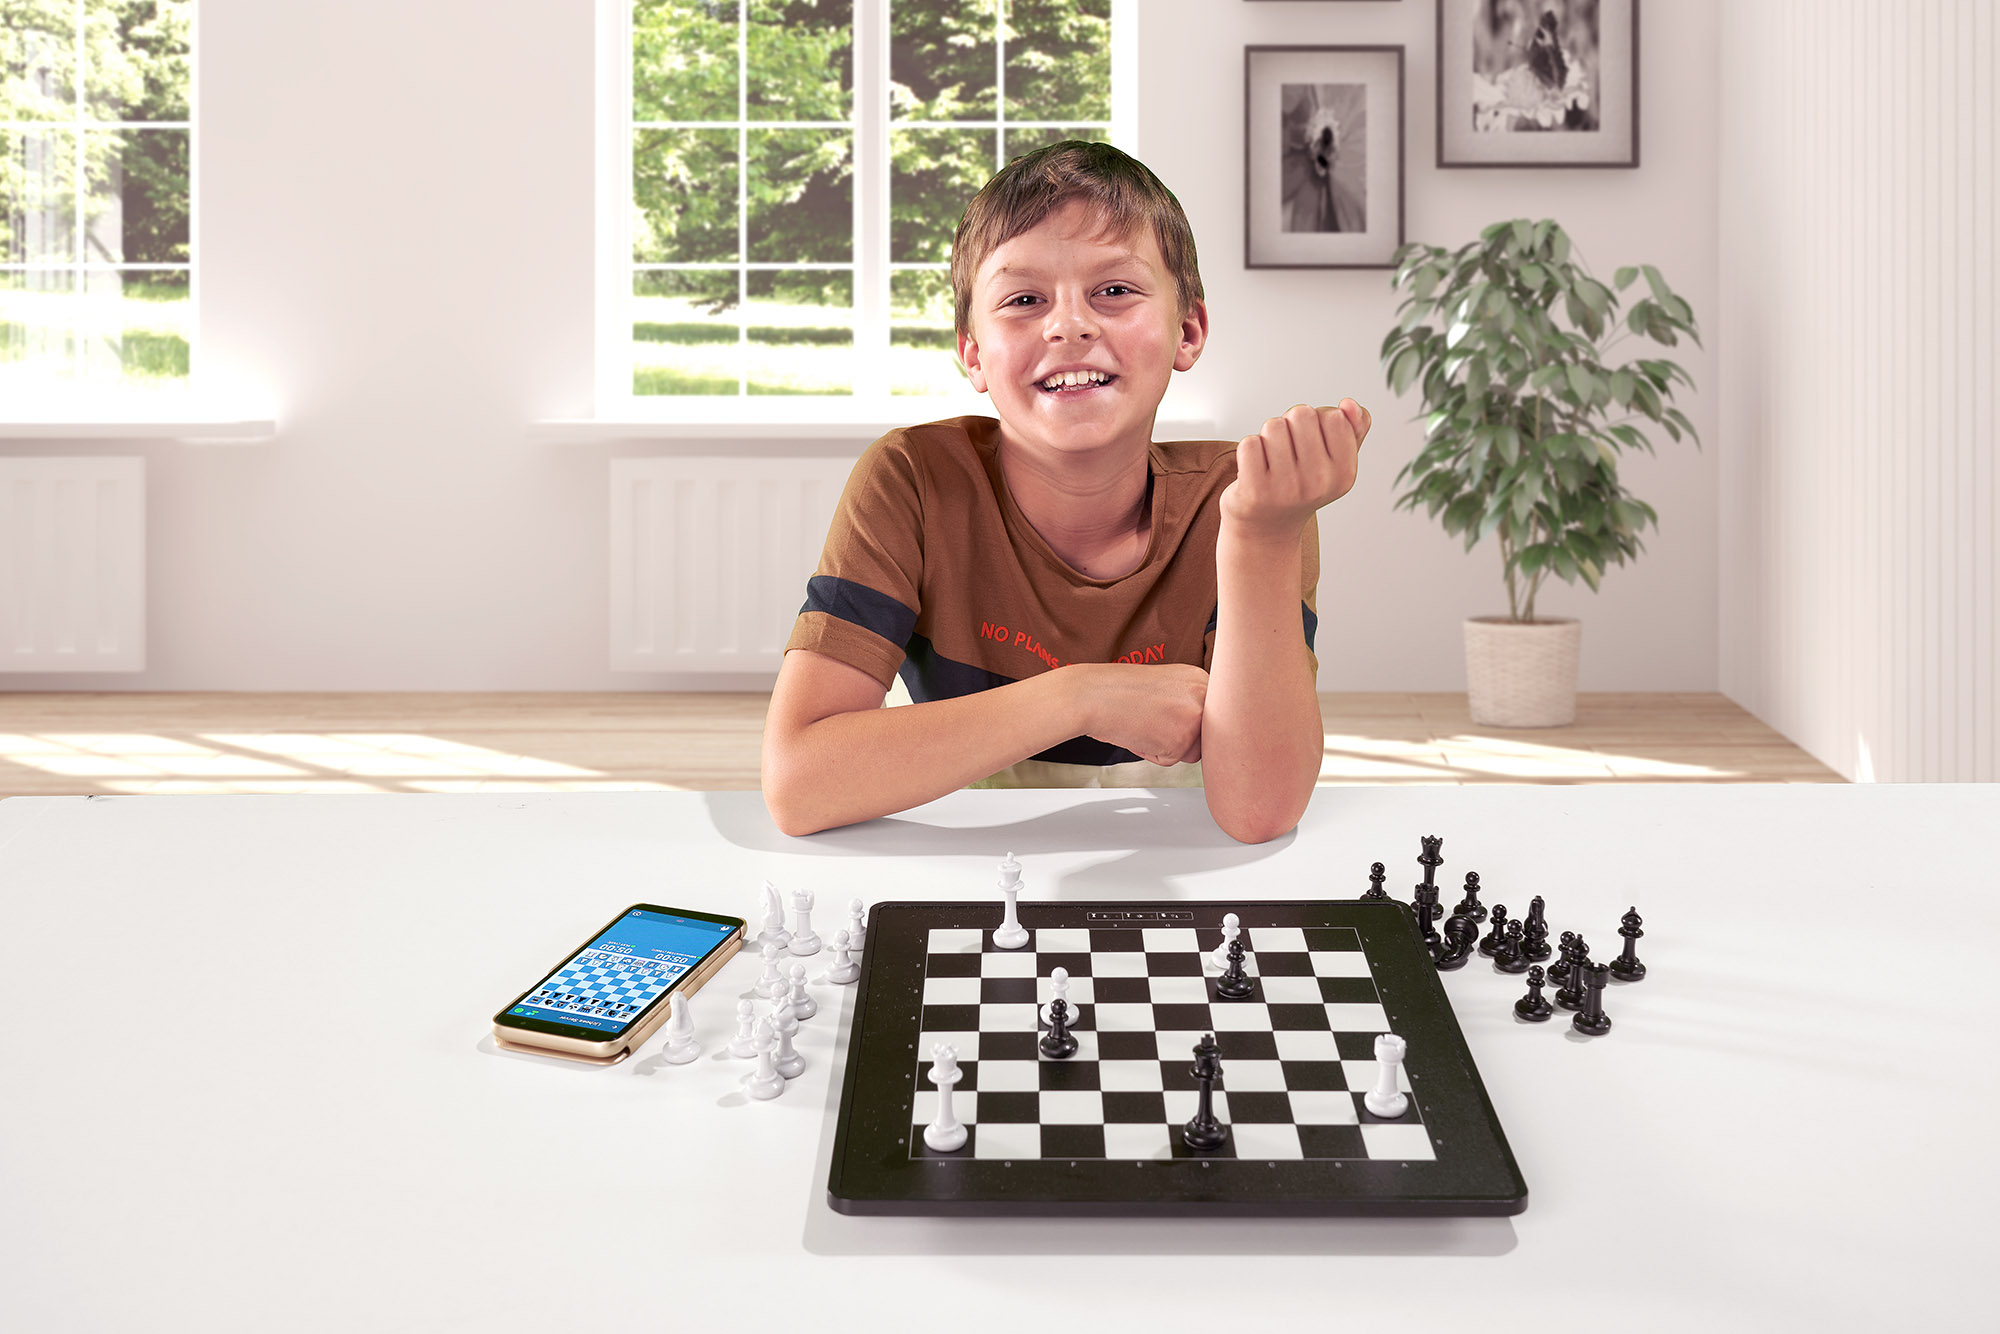  Millennium Chess Champion Electronic Chess Board - for